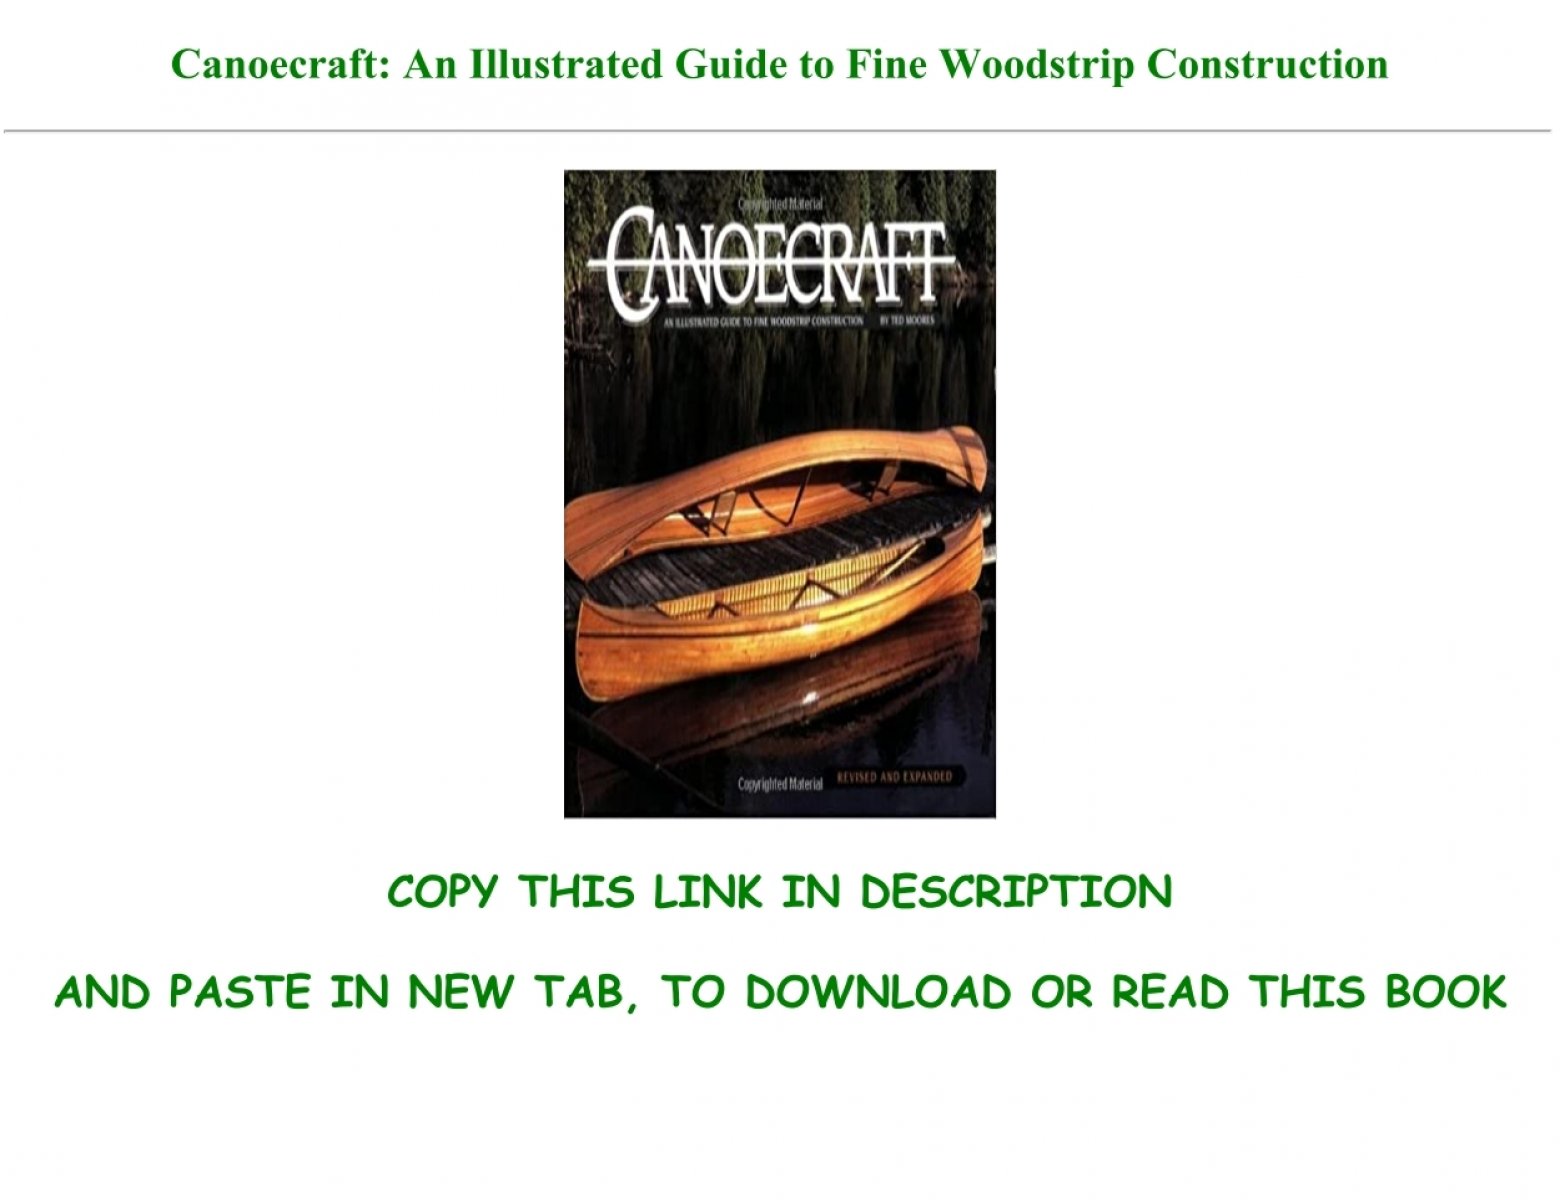 canoecraft an illustrated guide to fine woodstrip construction download